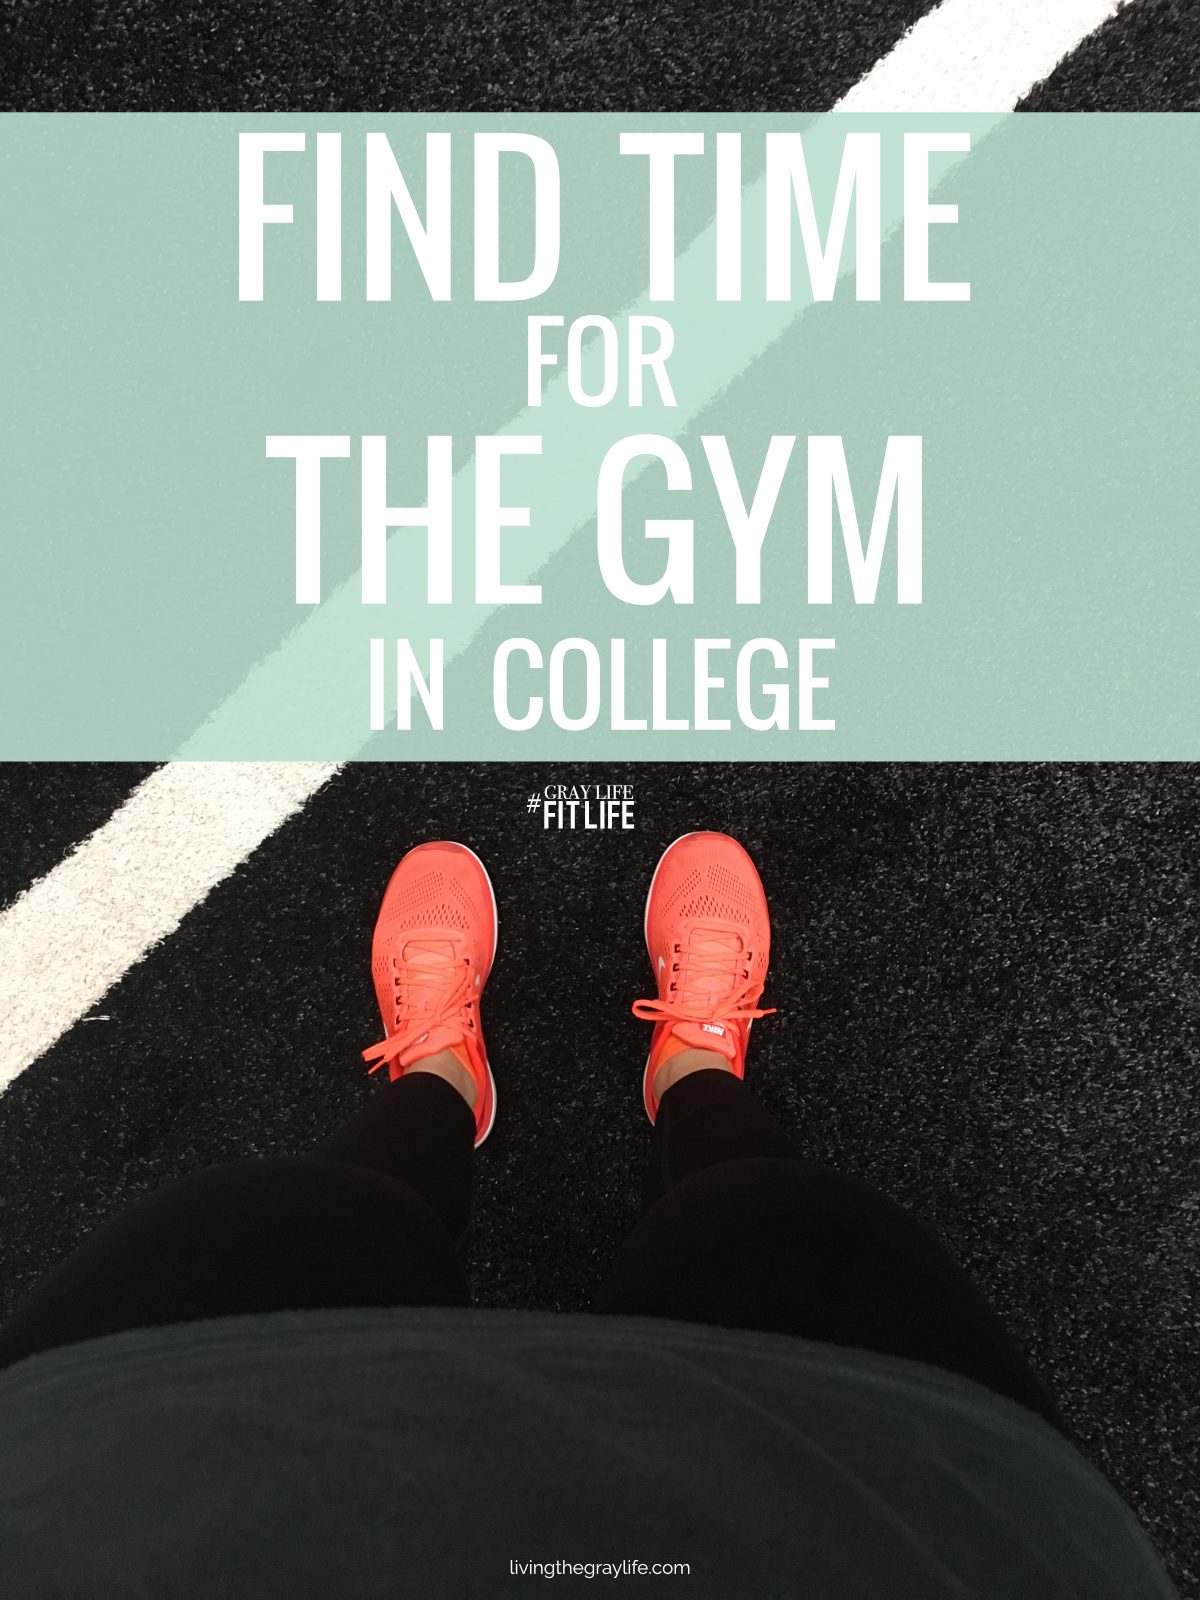 Wanting to get into a gym routine while in college? Here's some tips for how to find time for the gym!